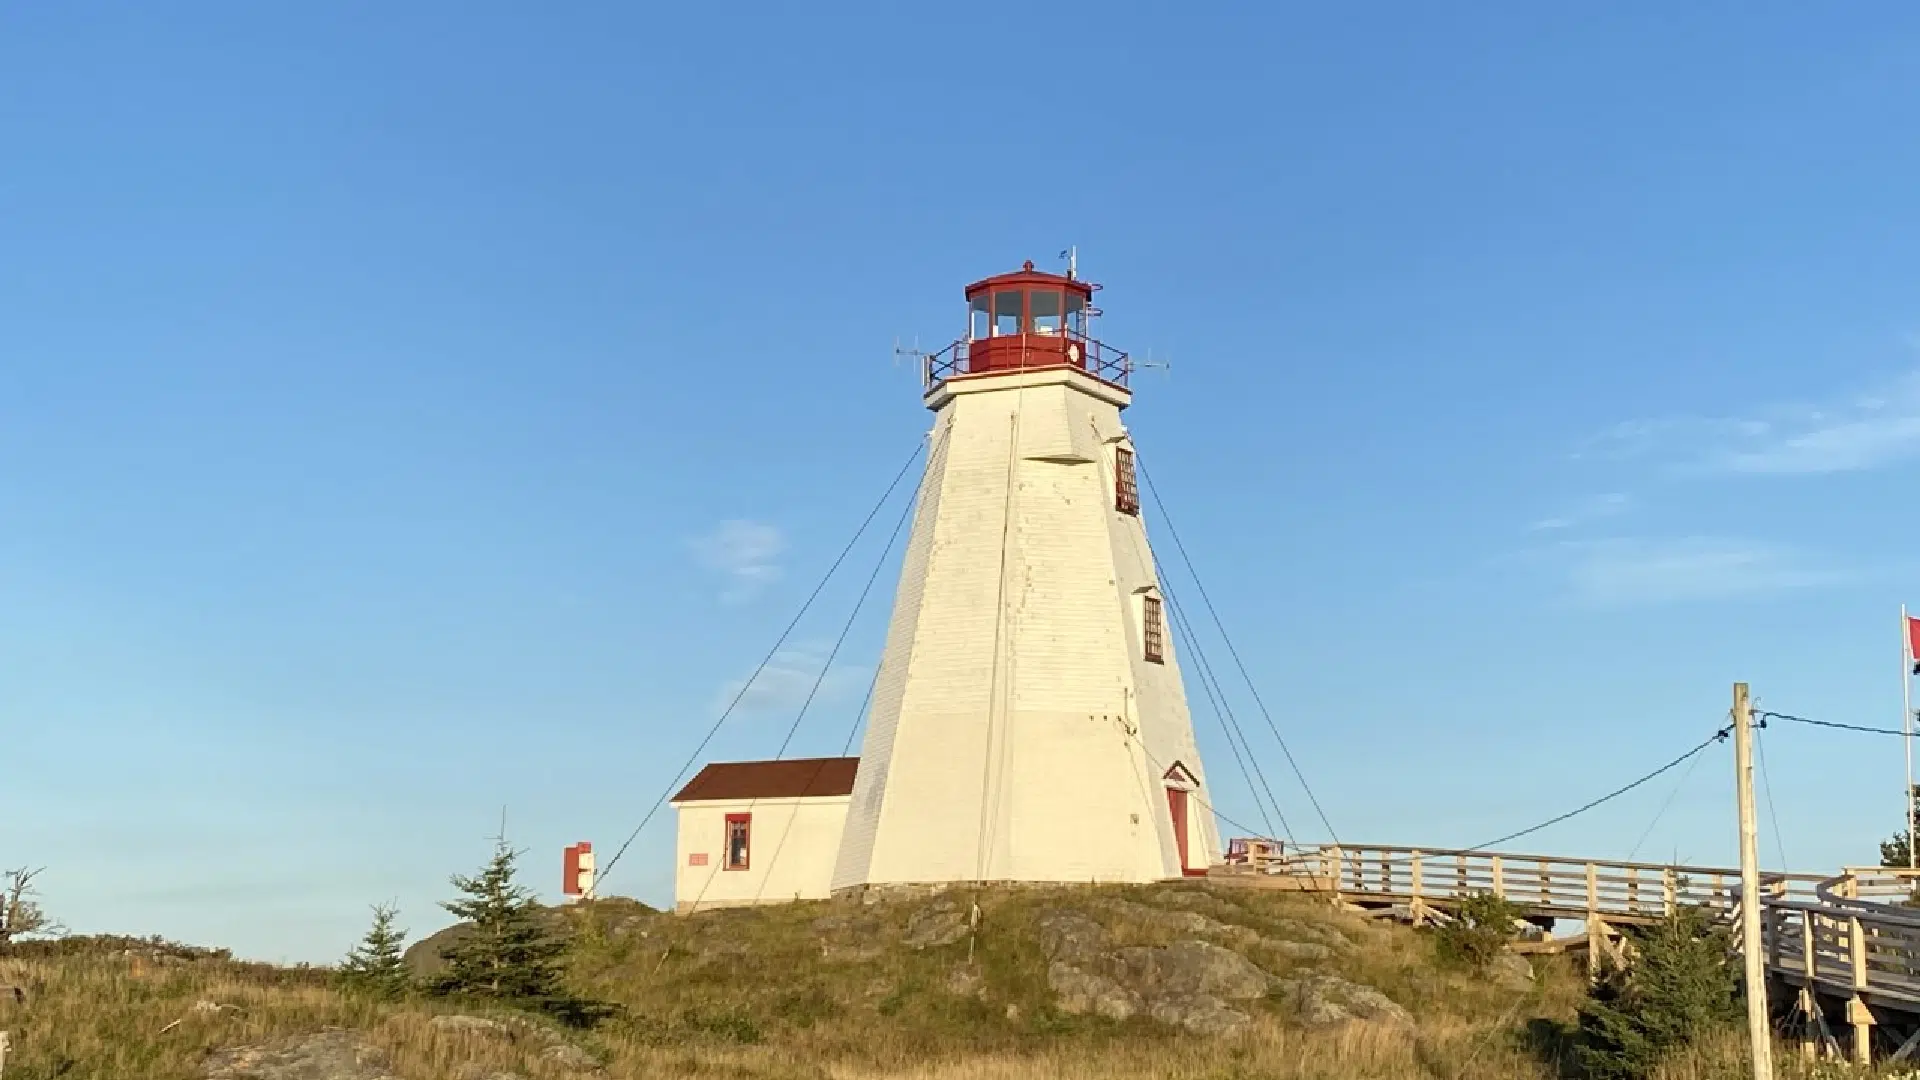 Fundraising Continues For Swallowtail Lighthouse Restoration